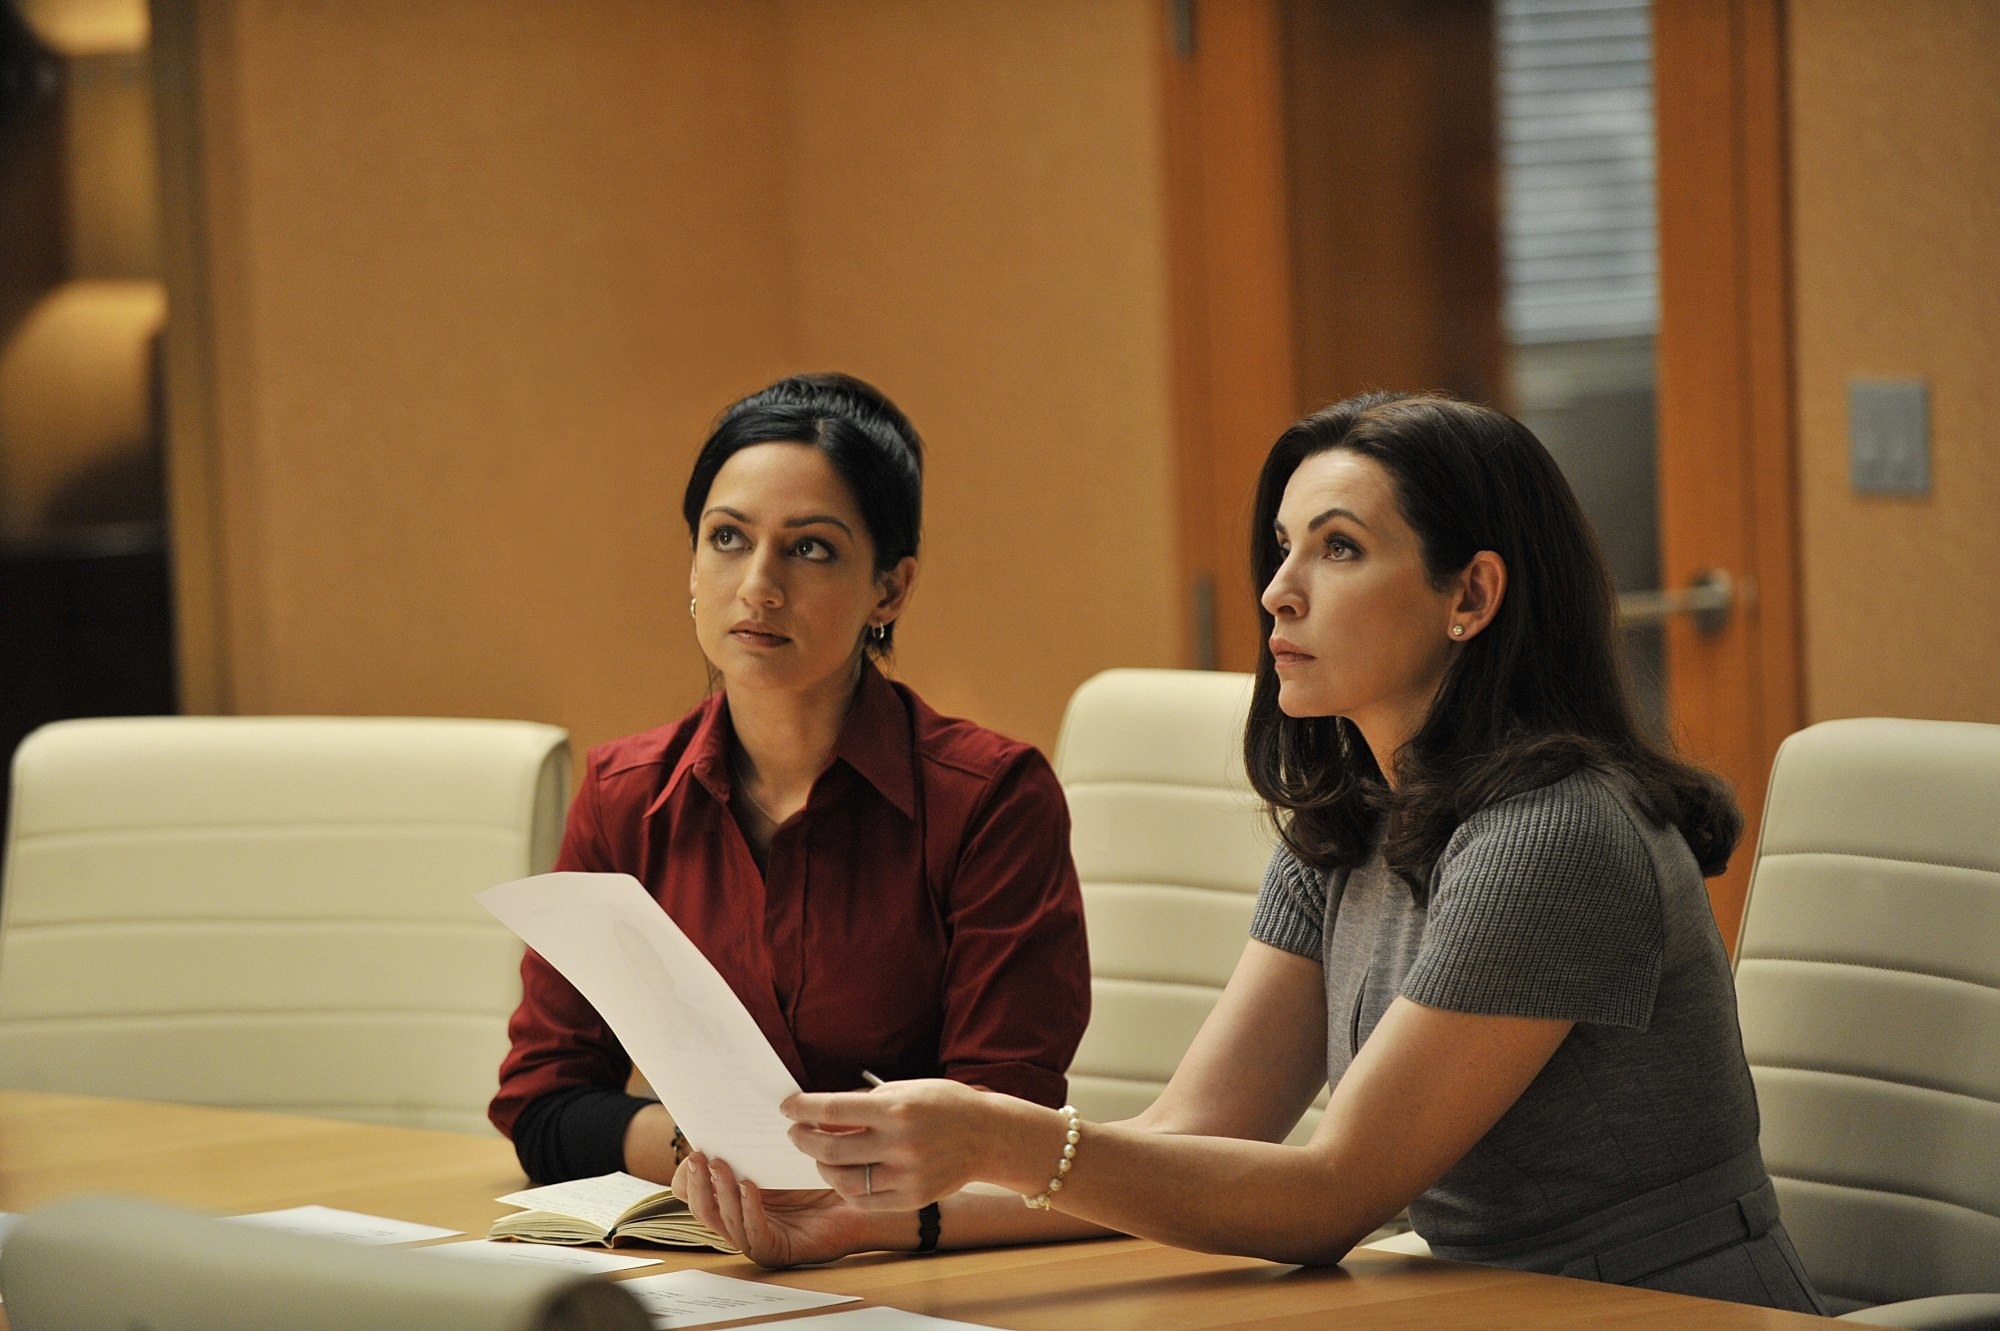 Archie Panjabi and Julianna Margulies in a scene from "The Good Wi...